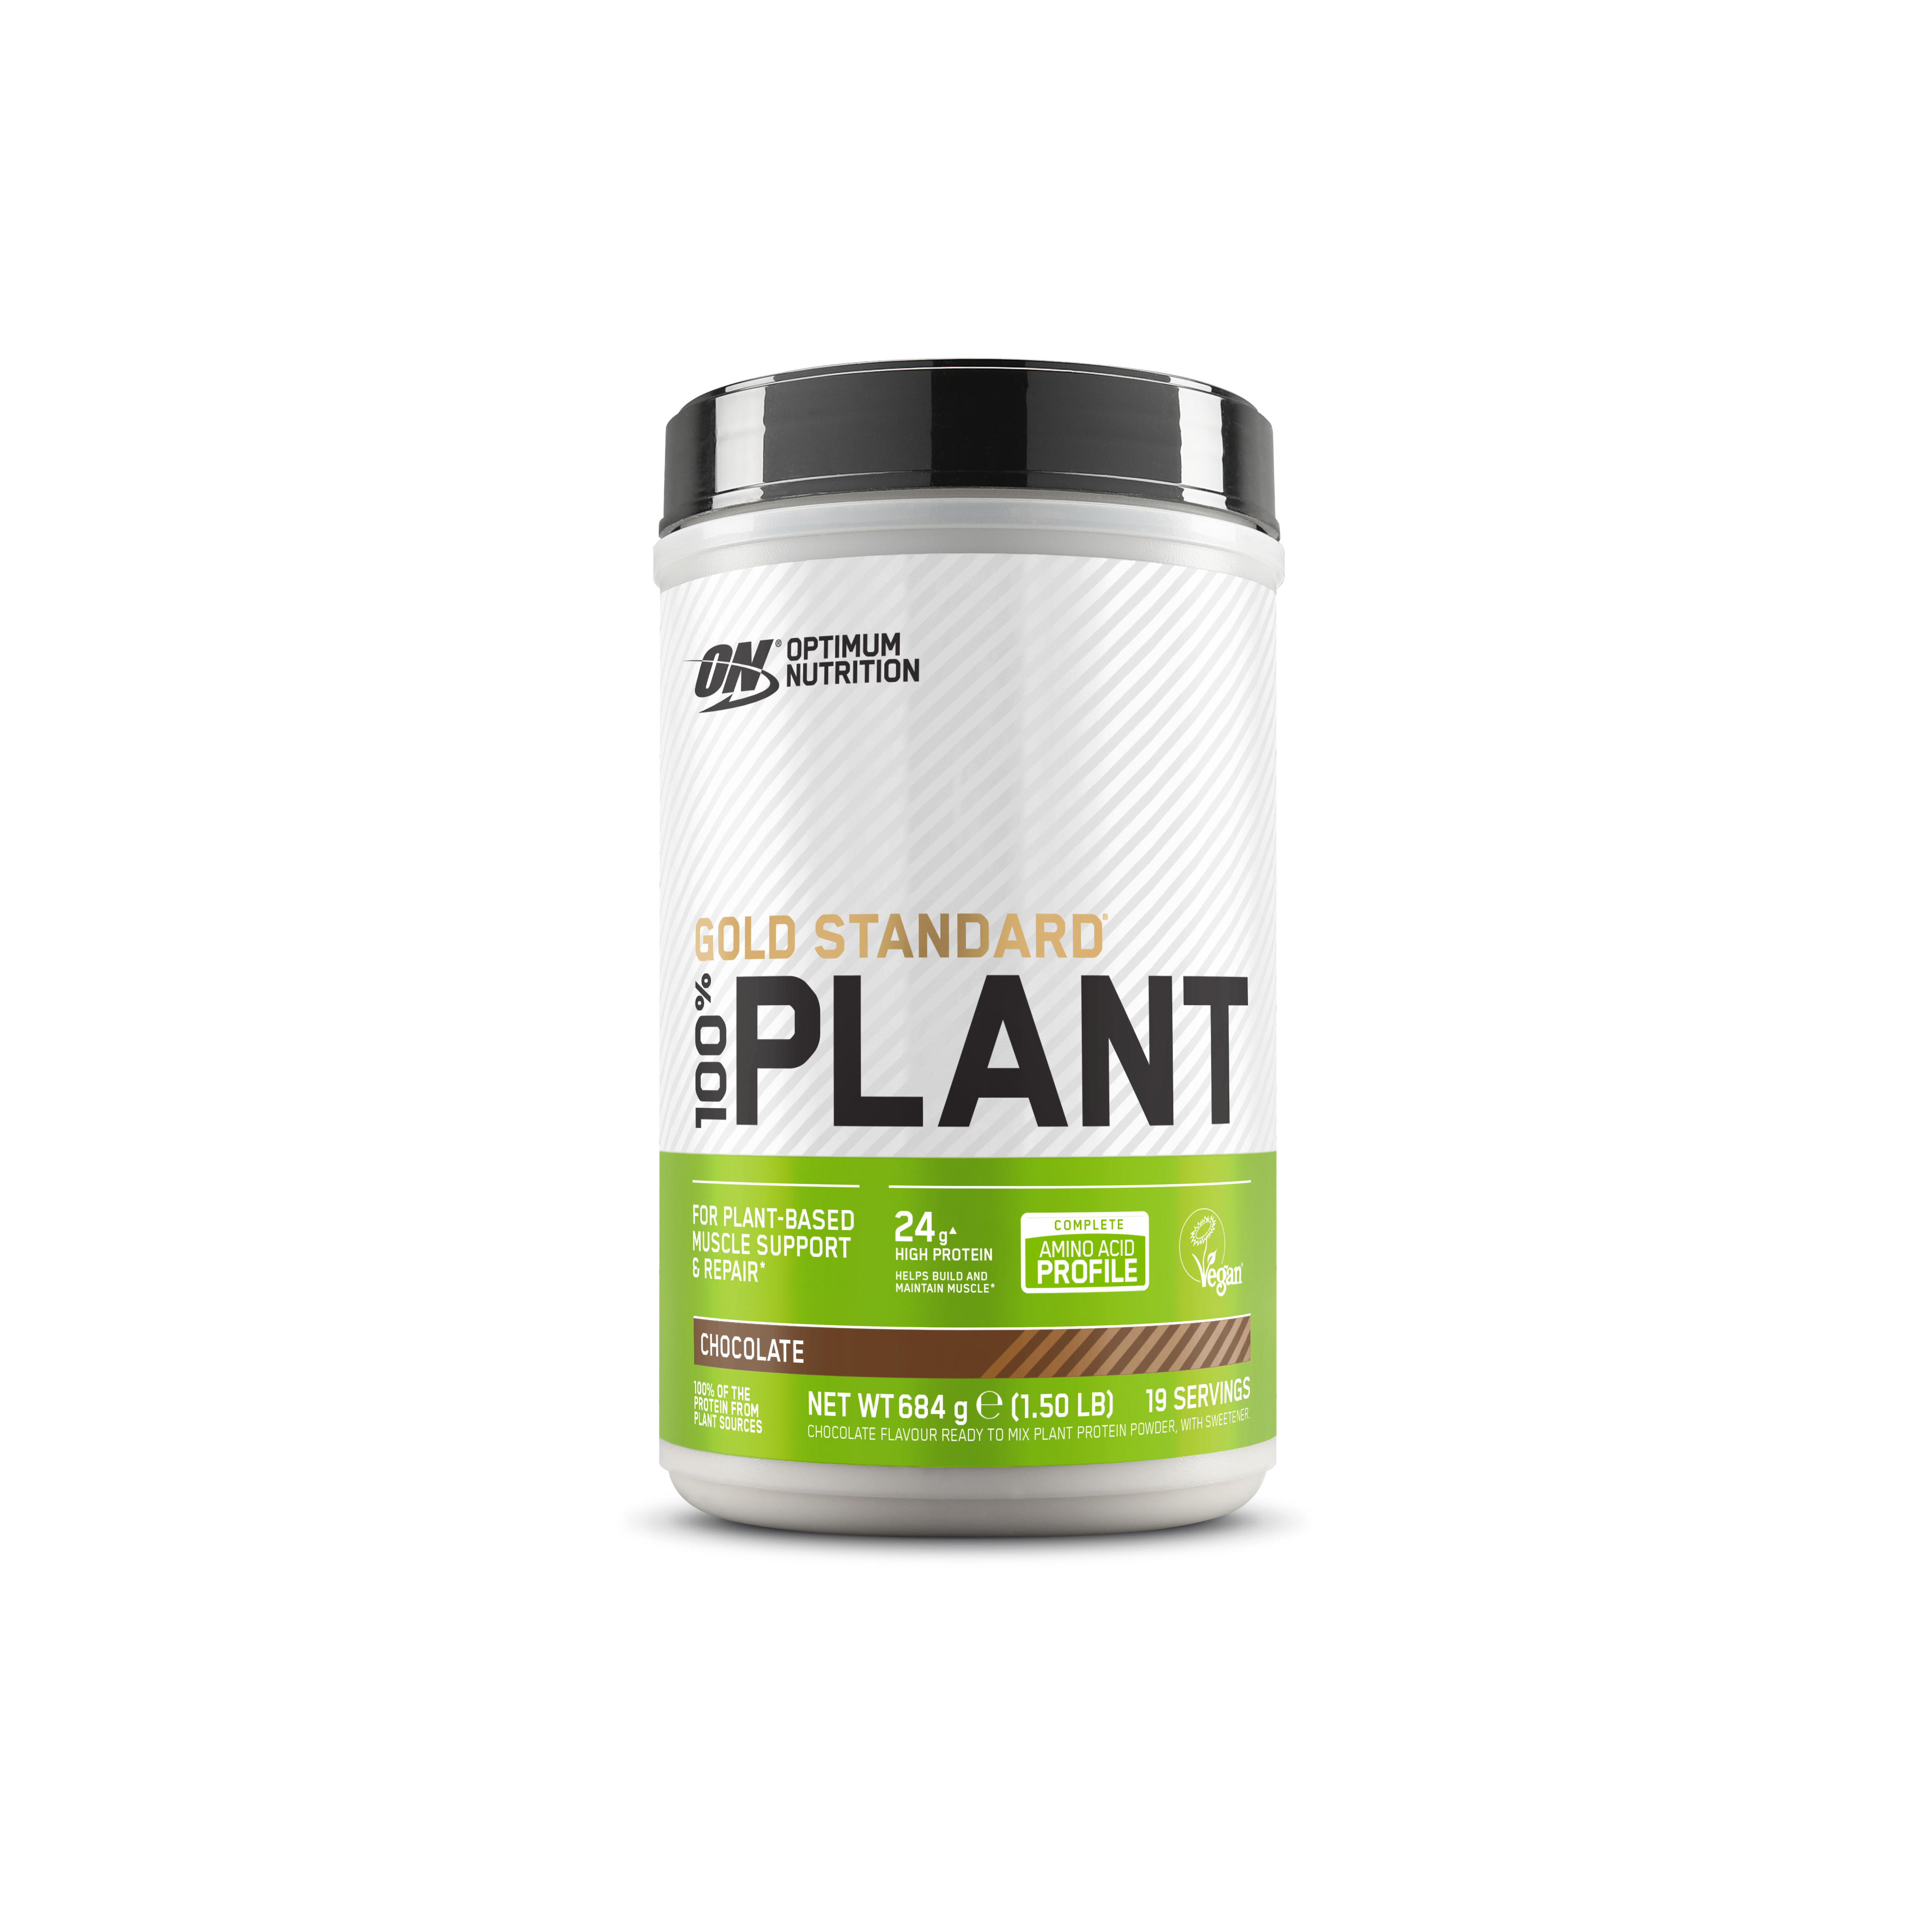 Gold Standard 100% Plant Based Protein Supplement 684 g (19 Shakes)